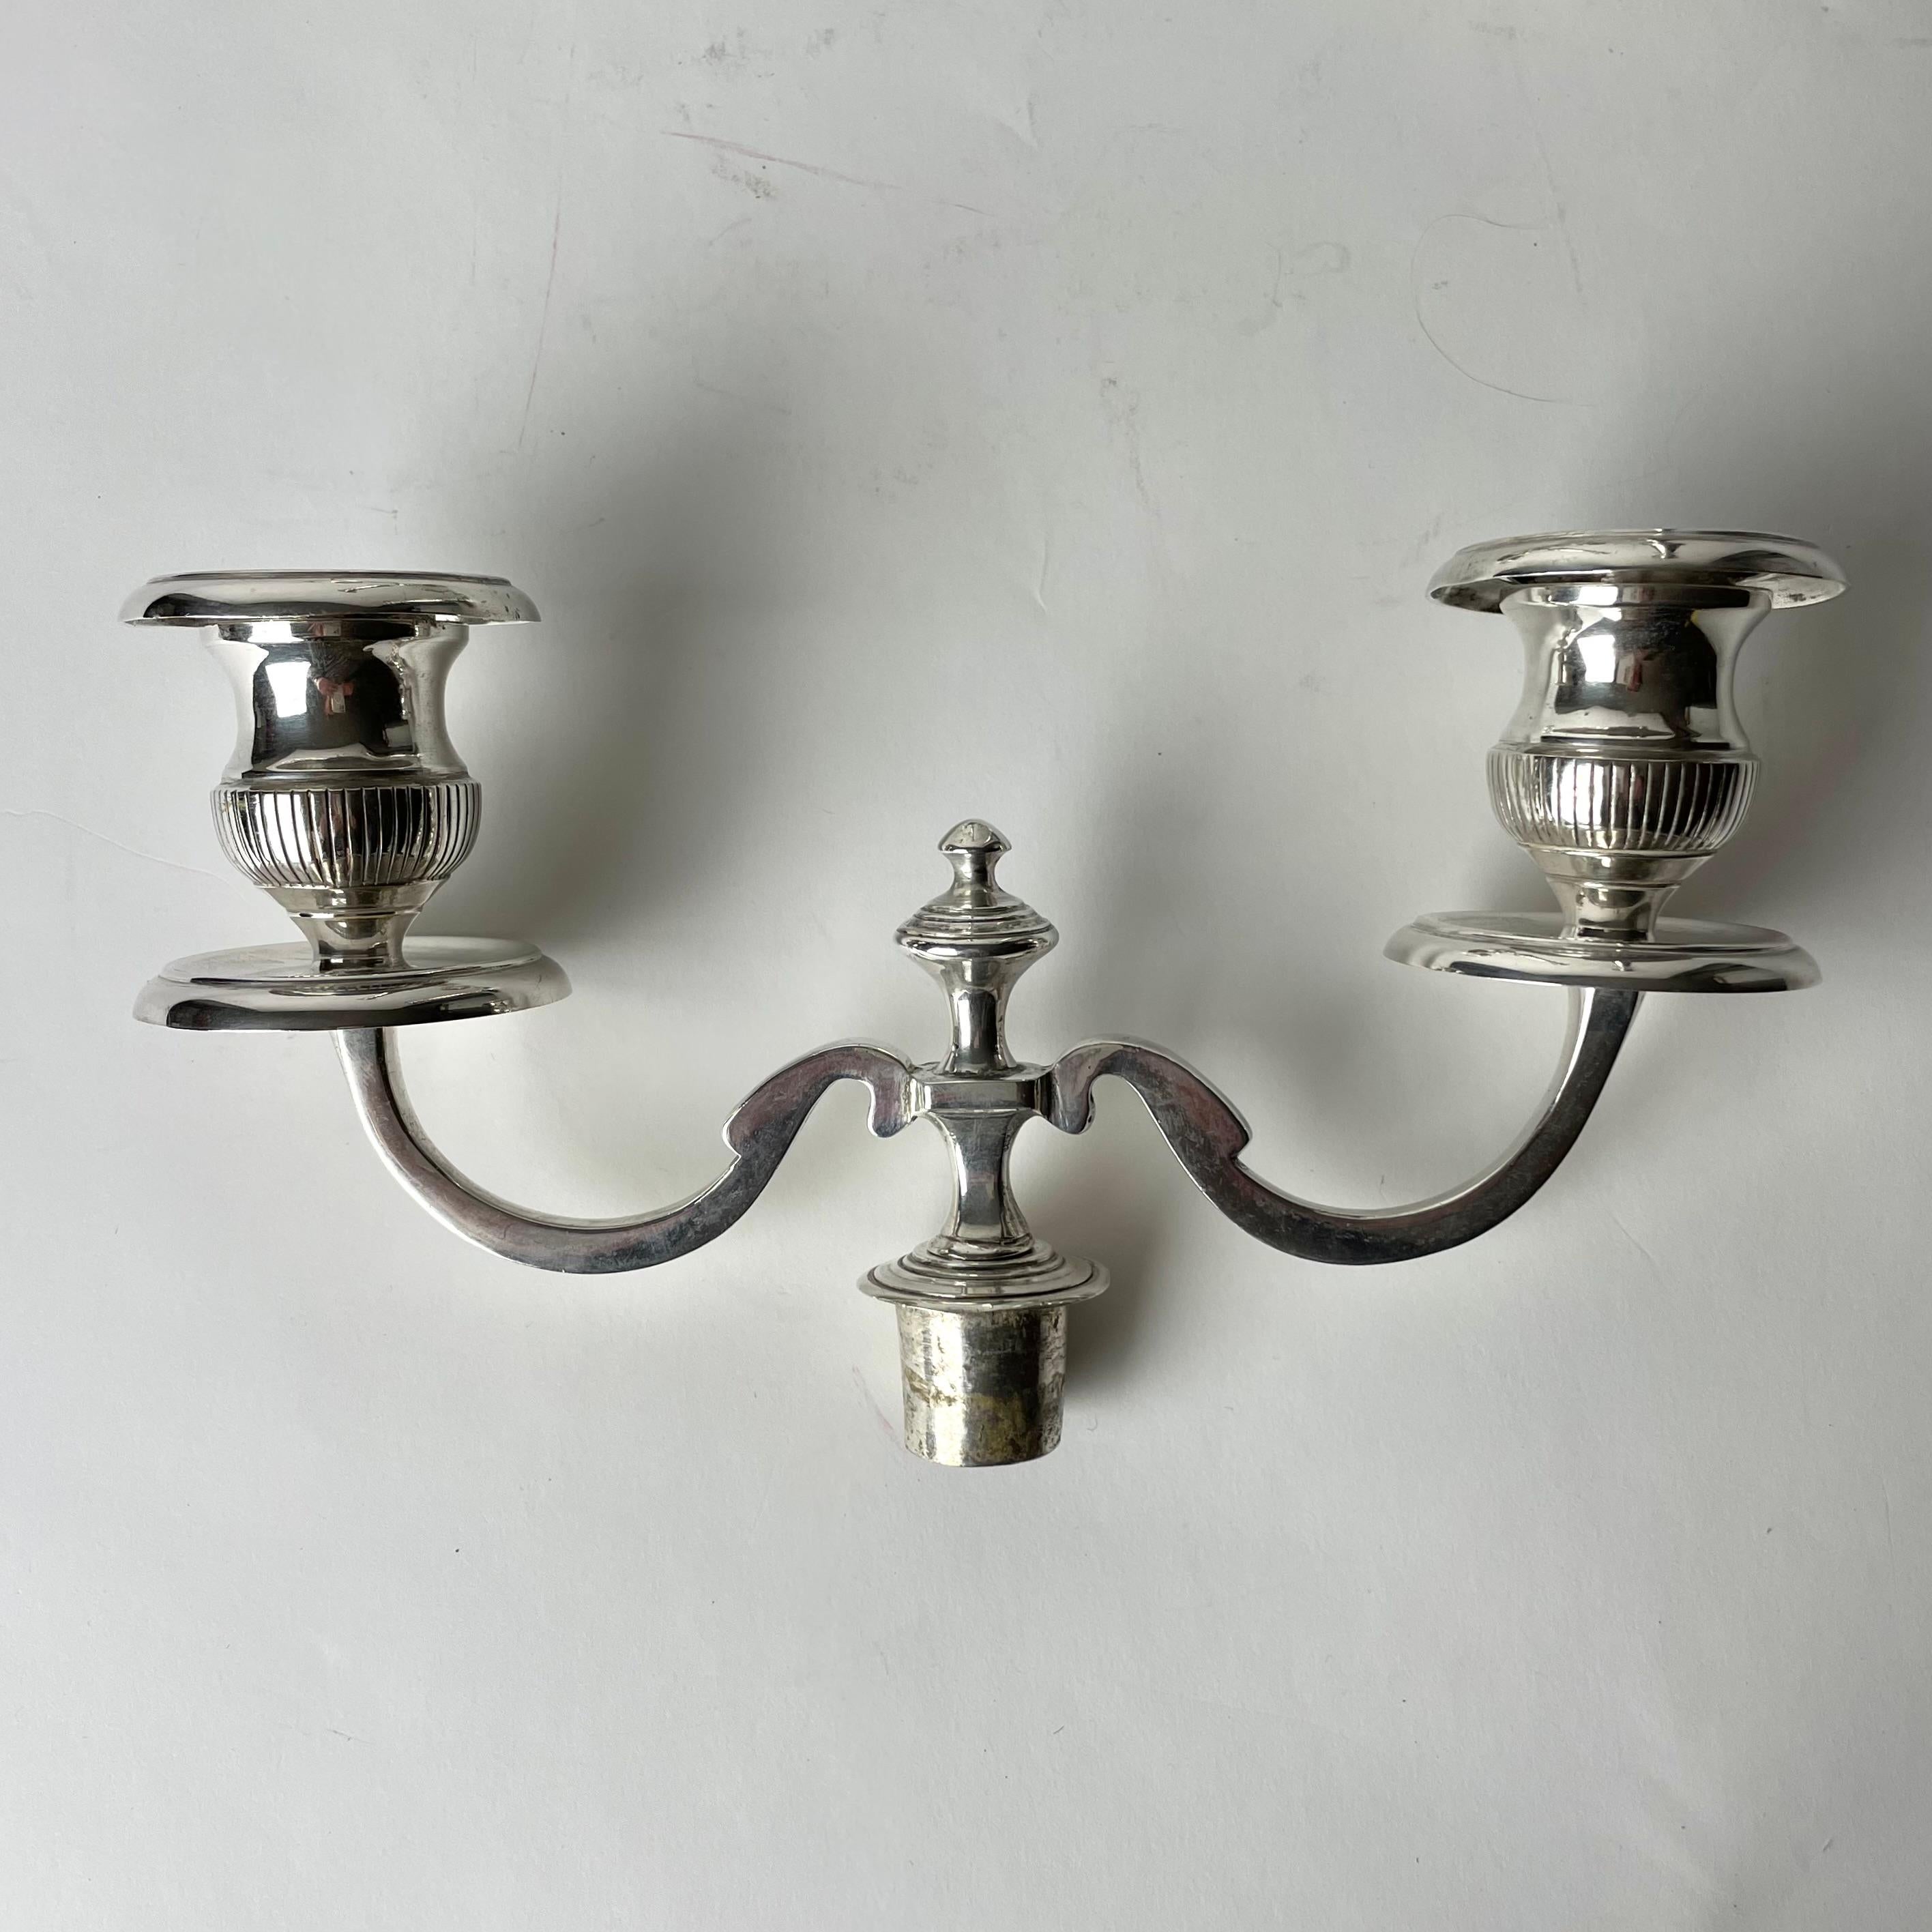 A pair of beautiful silver-plated Candelabras. Swedish Empire from the 1820s For Sale 5